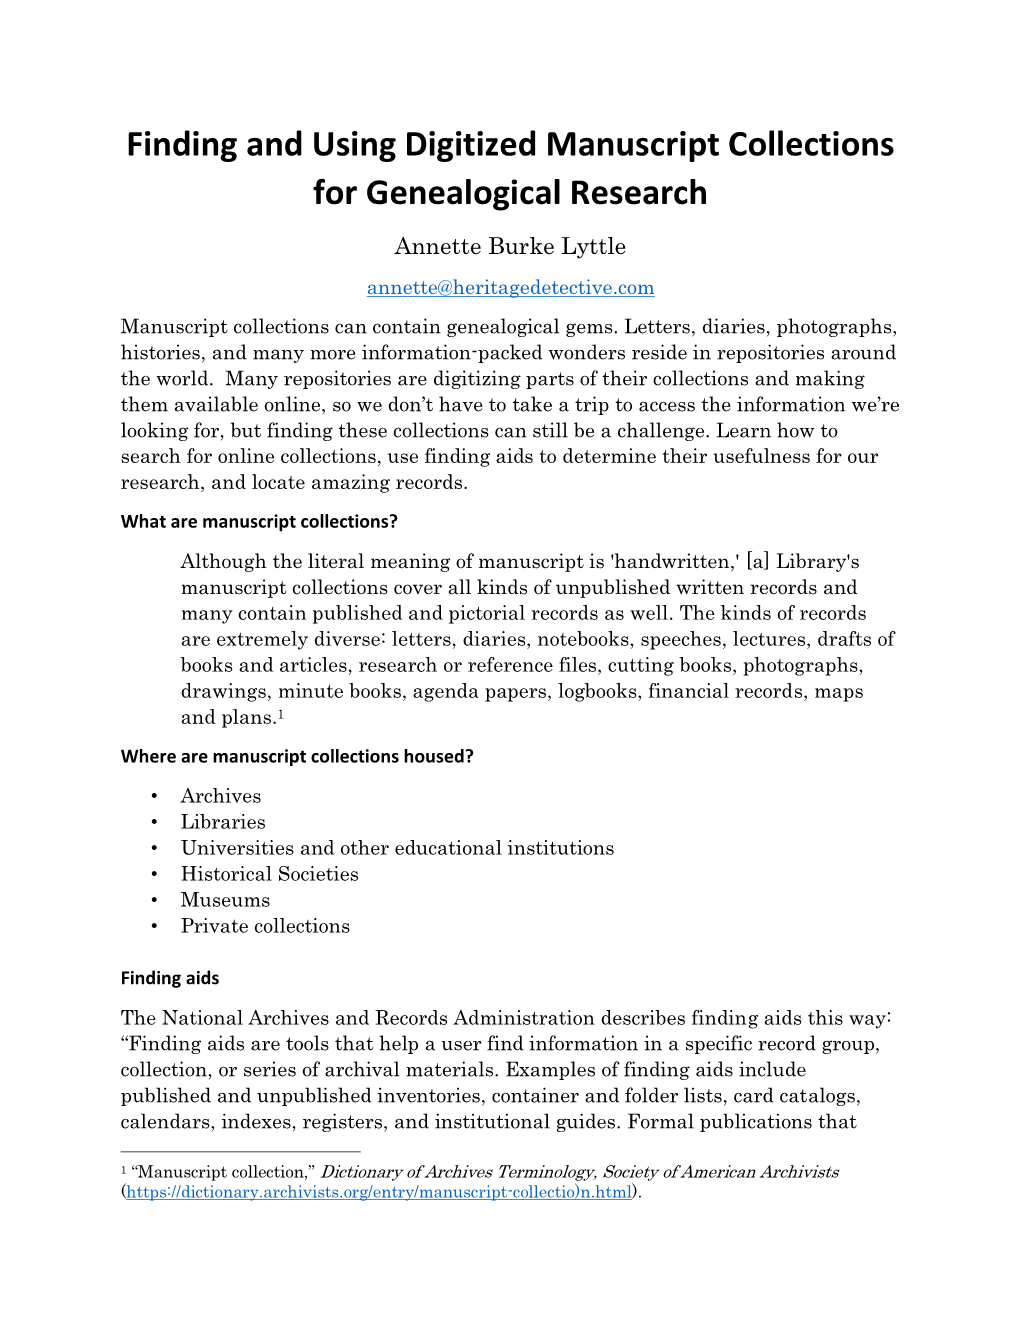 Finding and Using Digitized Manuscript Collections for Genealogical